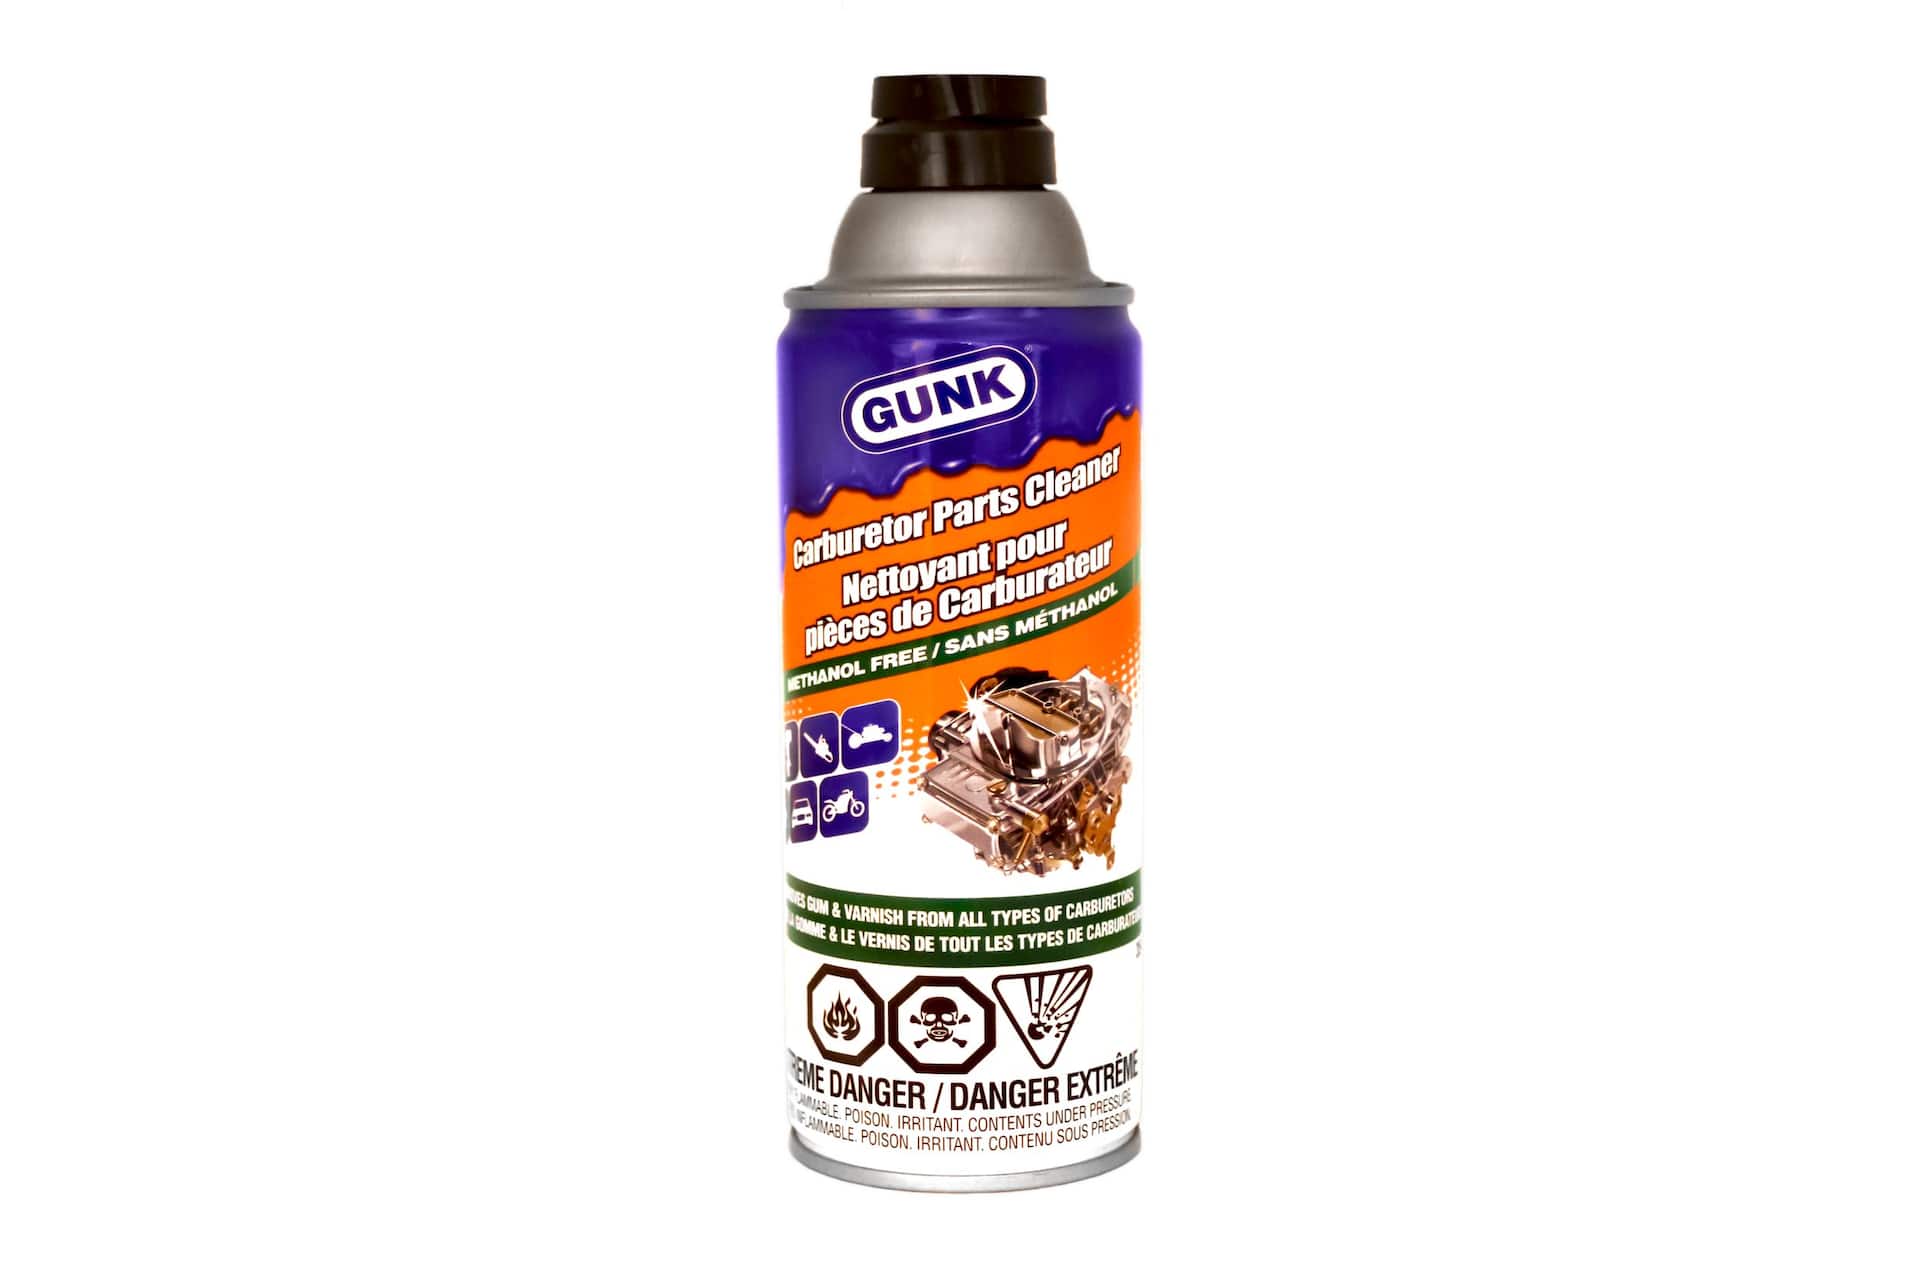 GUNK Electric Motor Contact Cleaner